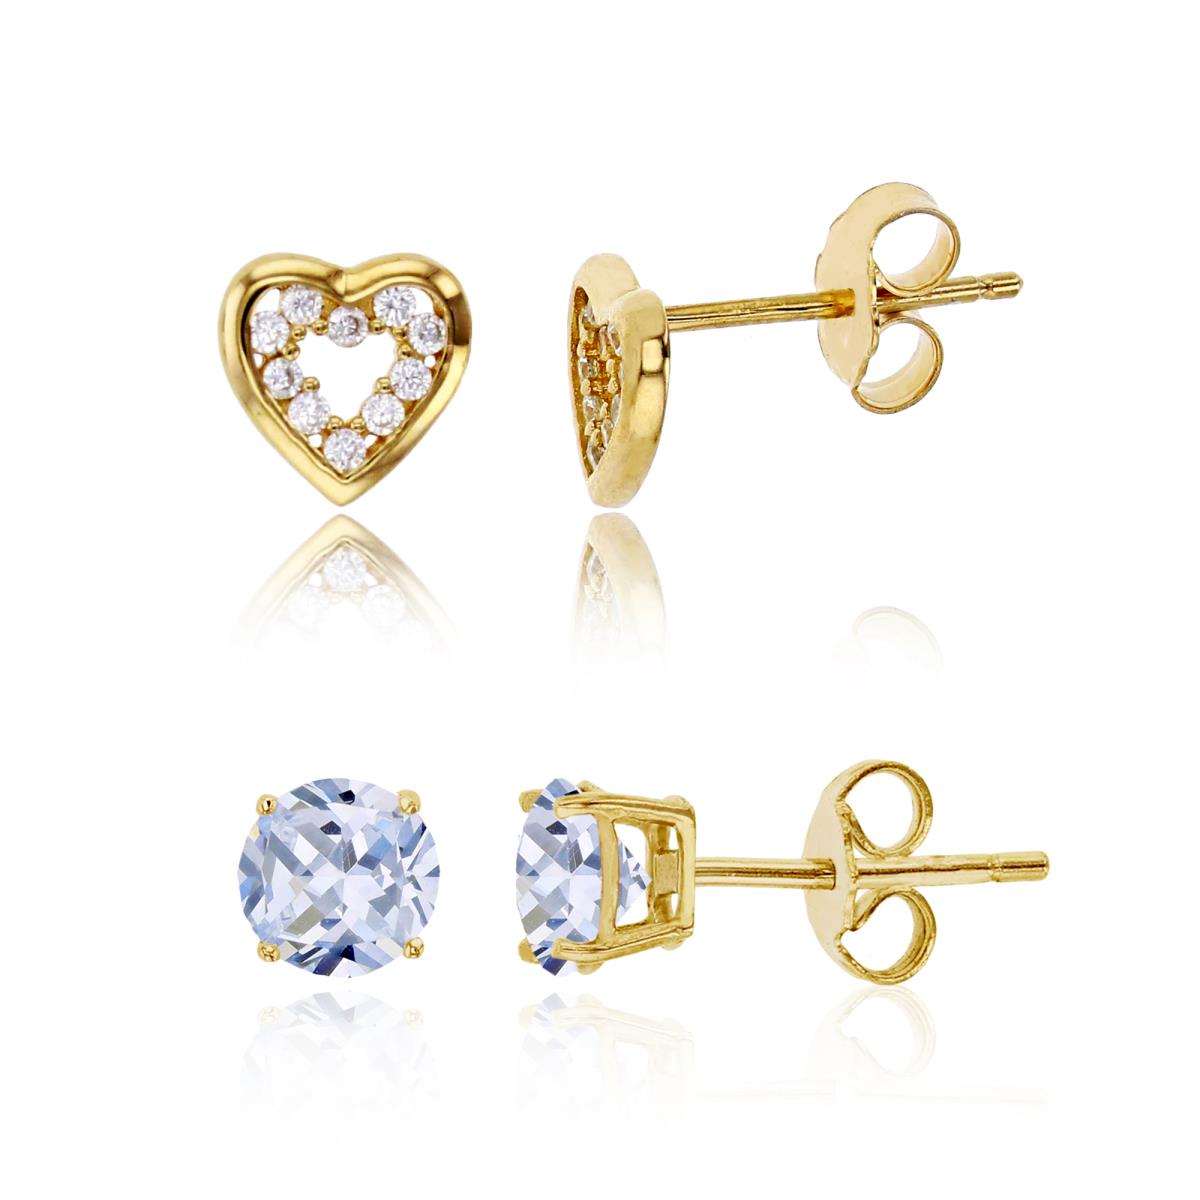 Sterling Silver Yellow 7x7mm Open Heart & 5mm Round Solitaire Stud Earring Set